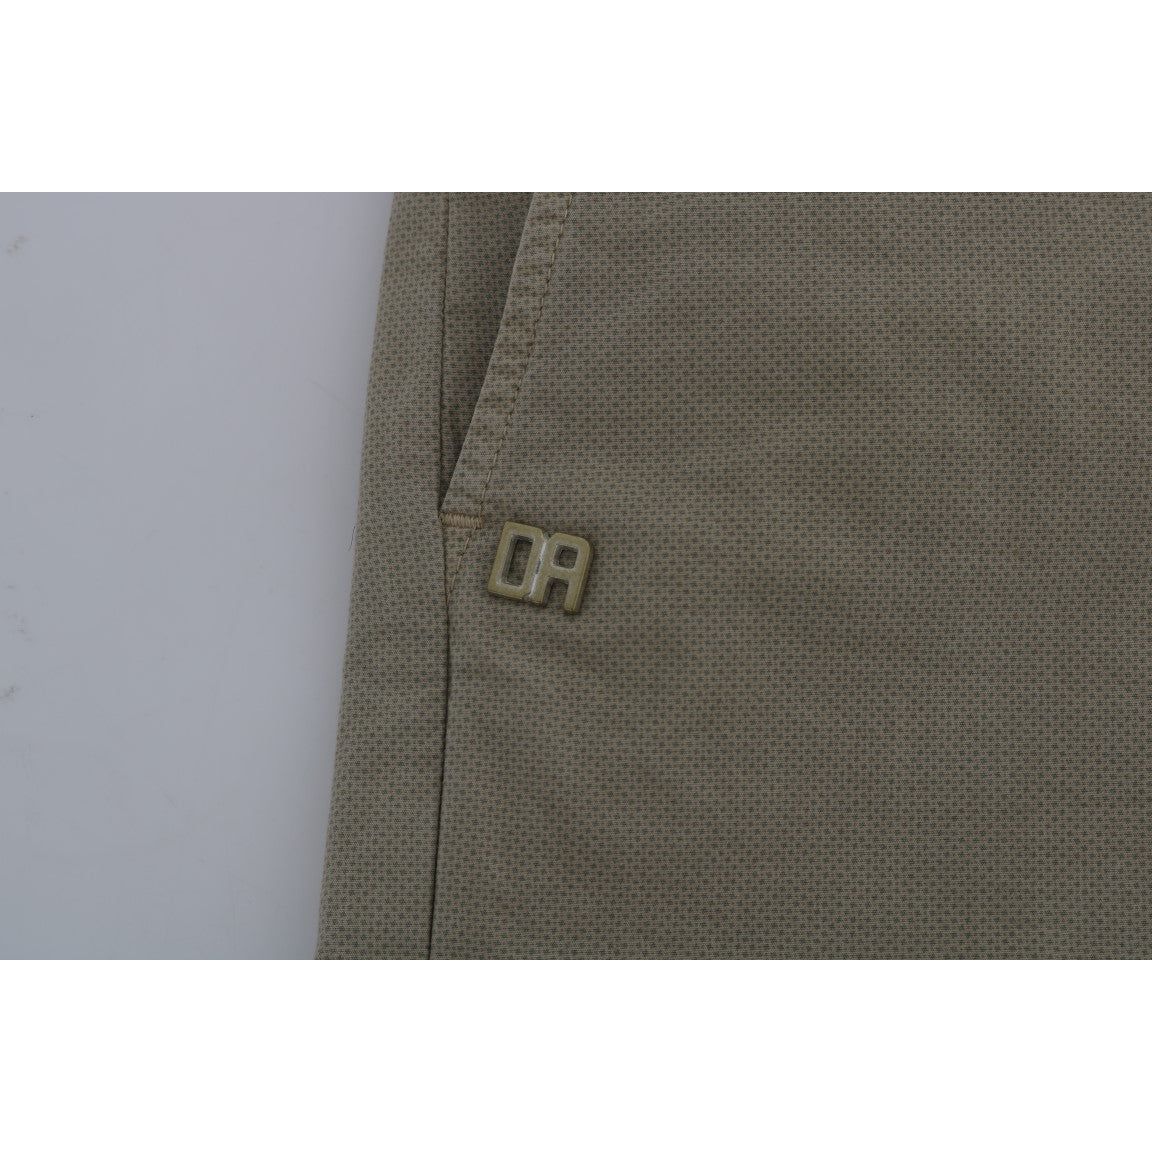 Daniele Alessandrini Beige Slim Fit Chinos for Sophisticated Style Jeans & Pants beige-cotton-stretch-slim-fit-chinos